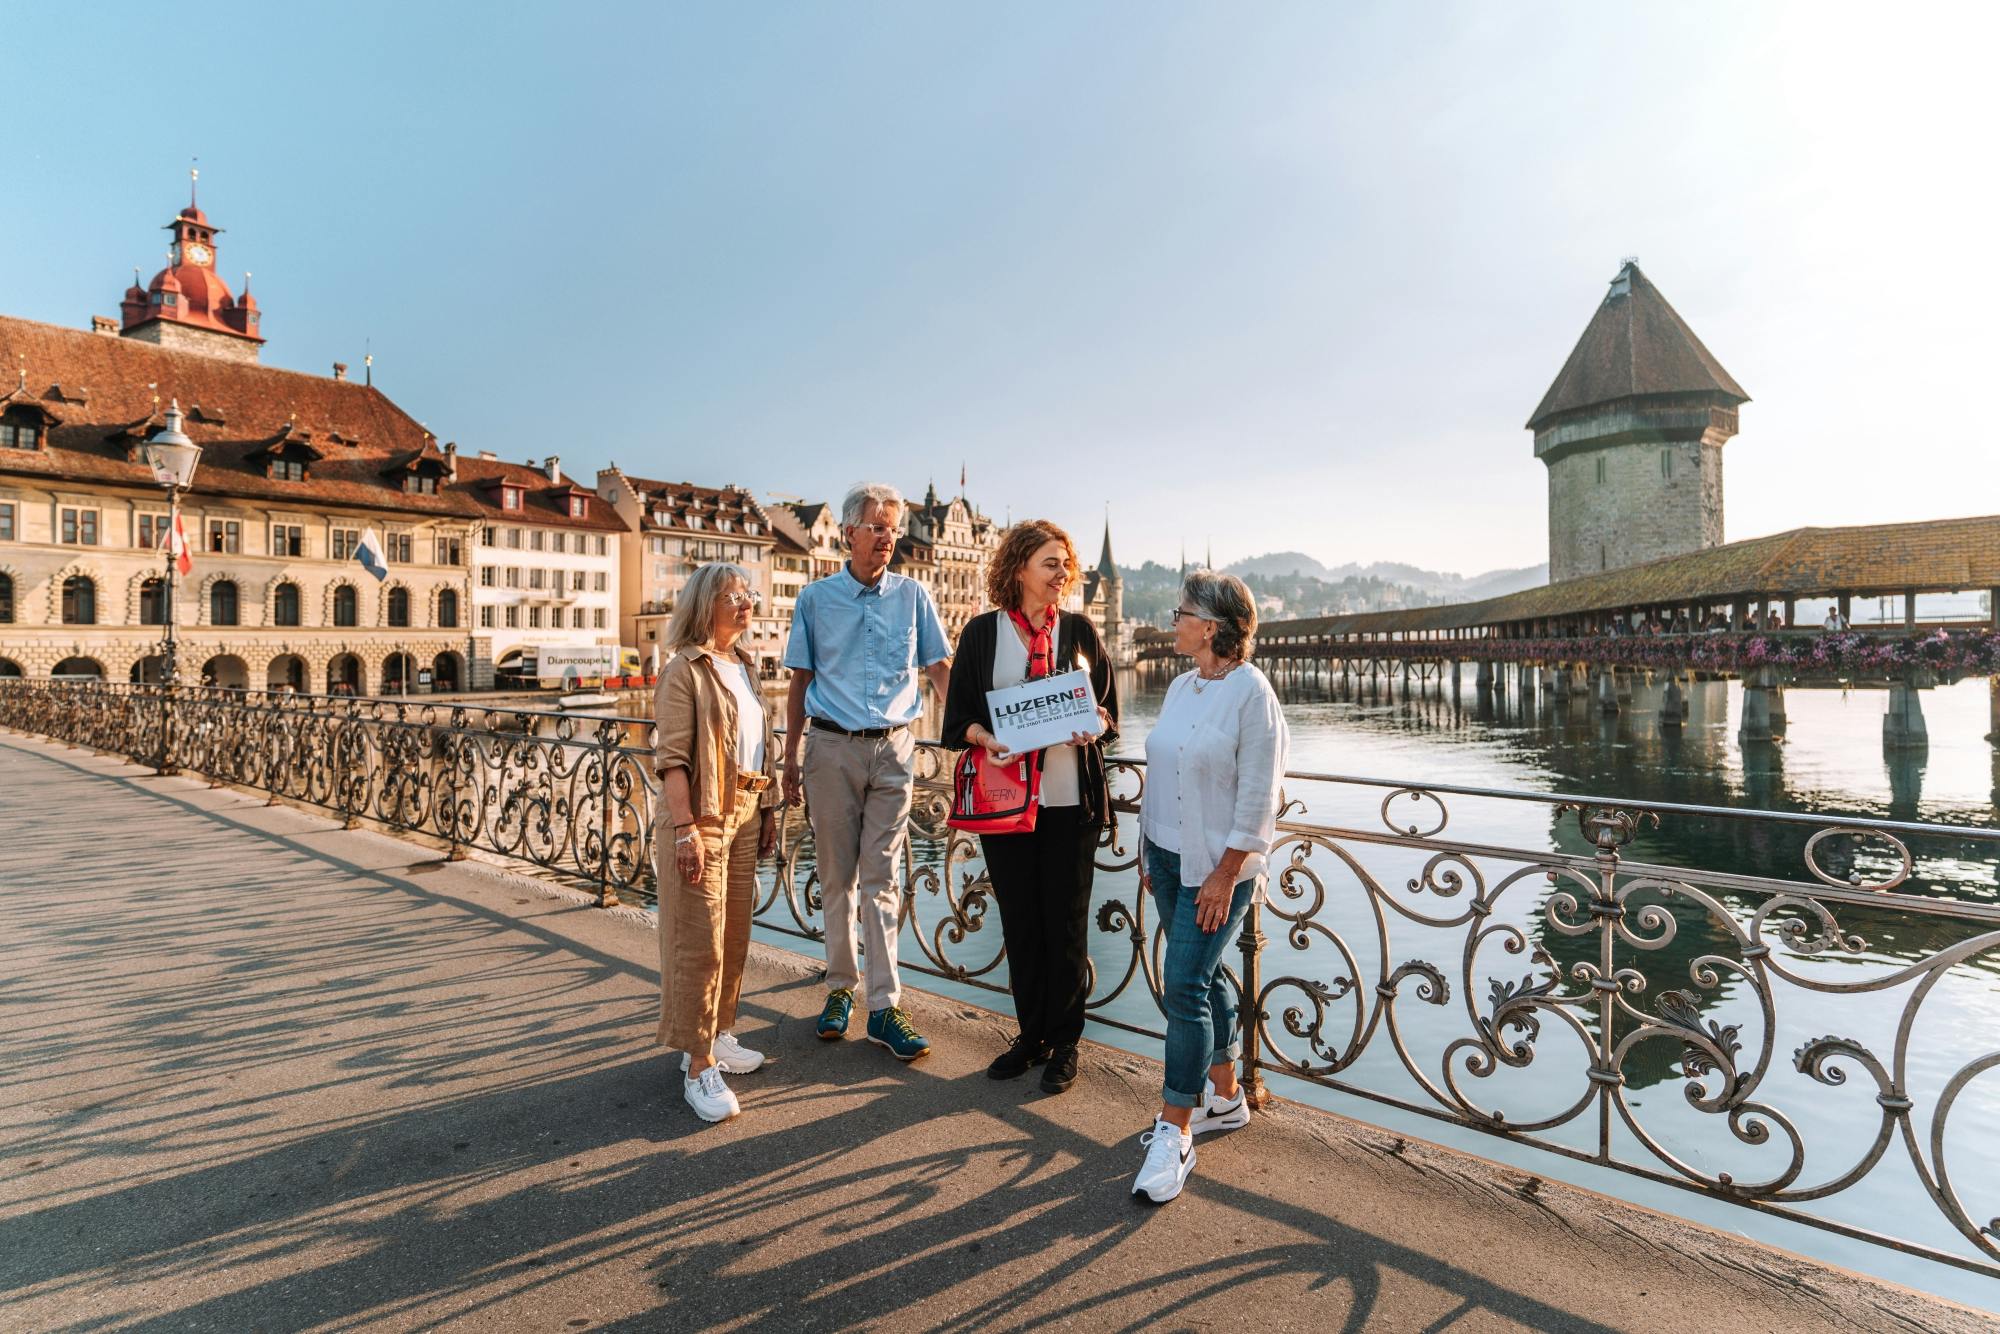 Guided City Tour of Lucerne for Individuals